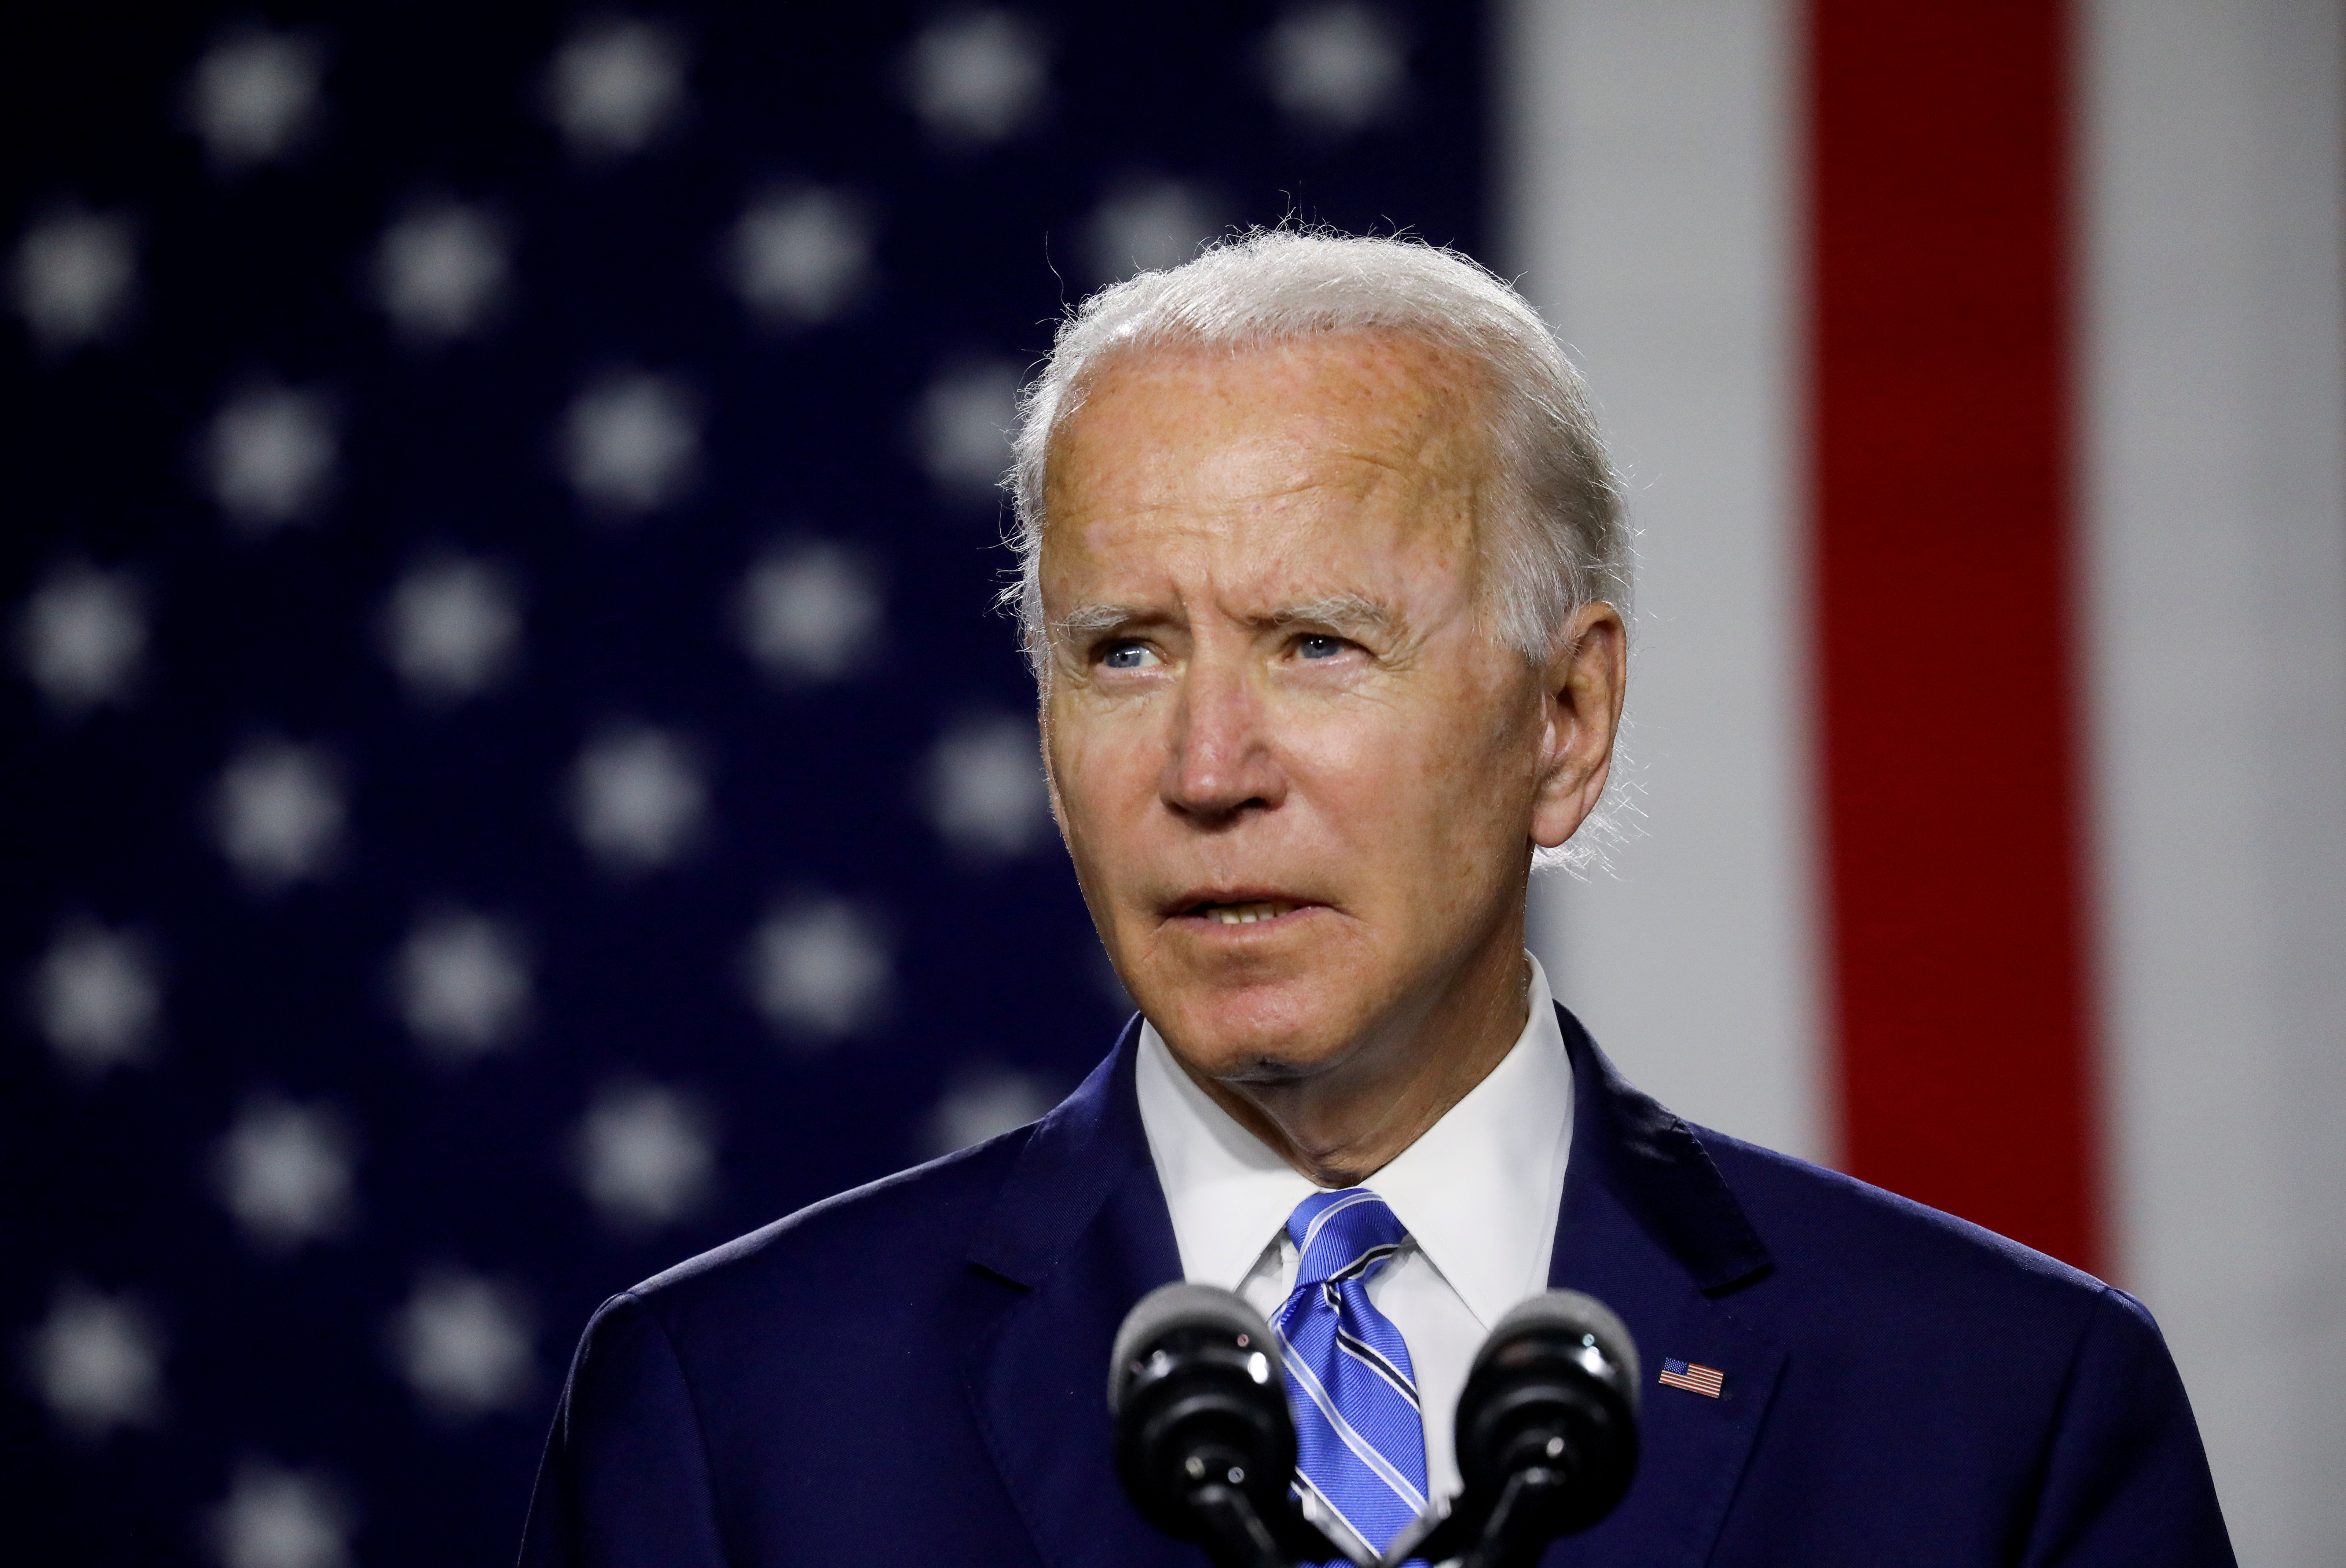 Democratic U.S. presidential candidate and former Vice President Joe Biden arrives to speak about modernizing infrastructure and his plans for tackling climate change during a campaign event in Wilmington, Delaware, U.S., July 14, 2020. REUTERS/Leah Millis